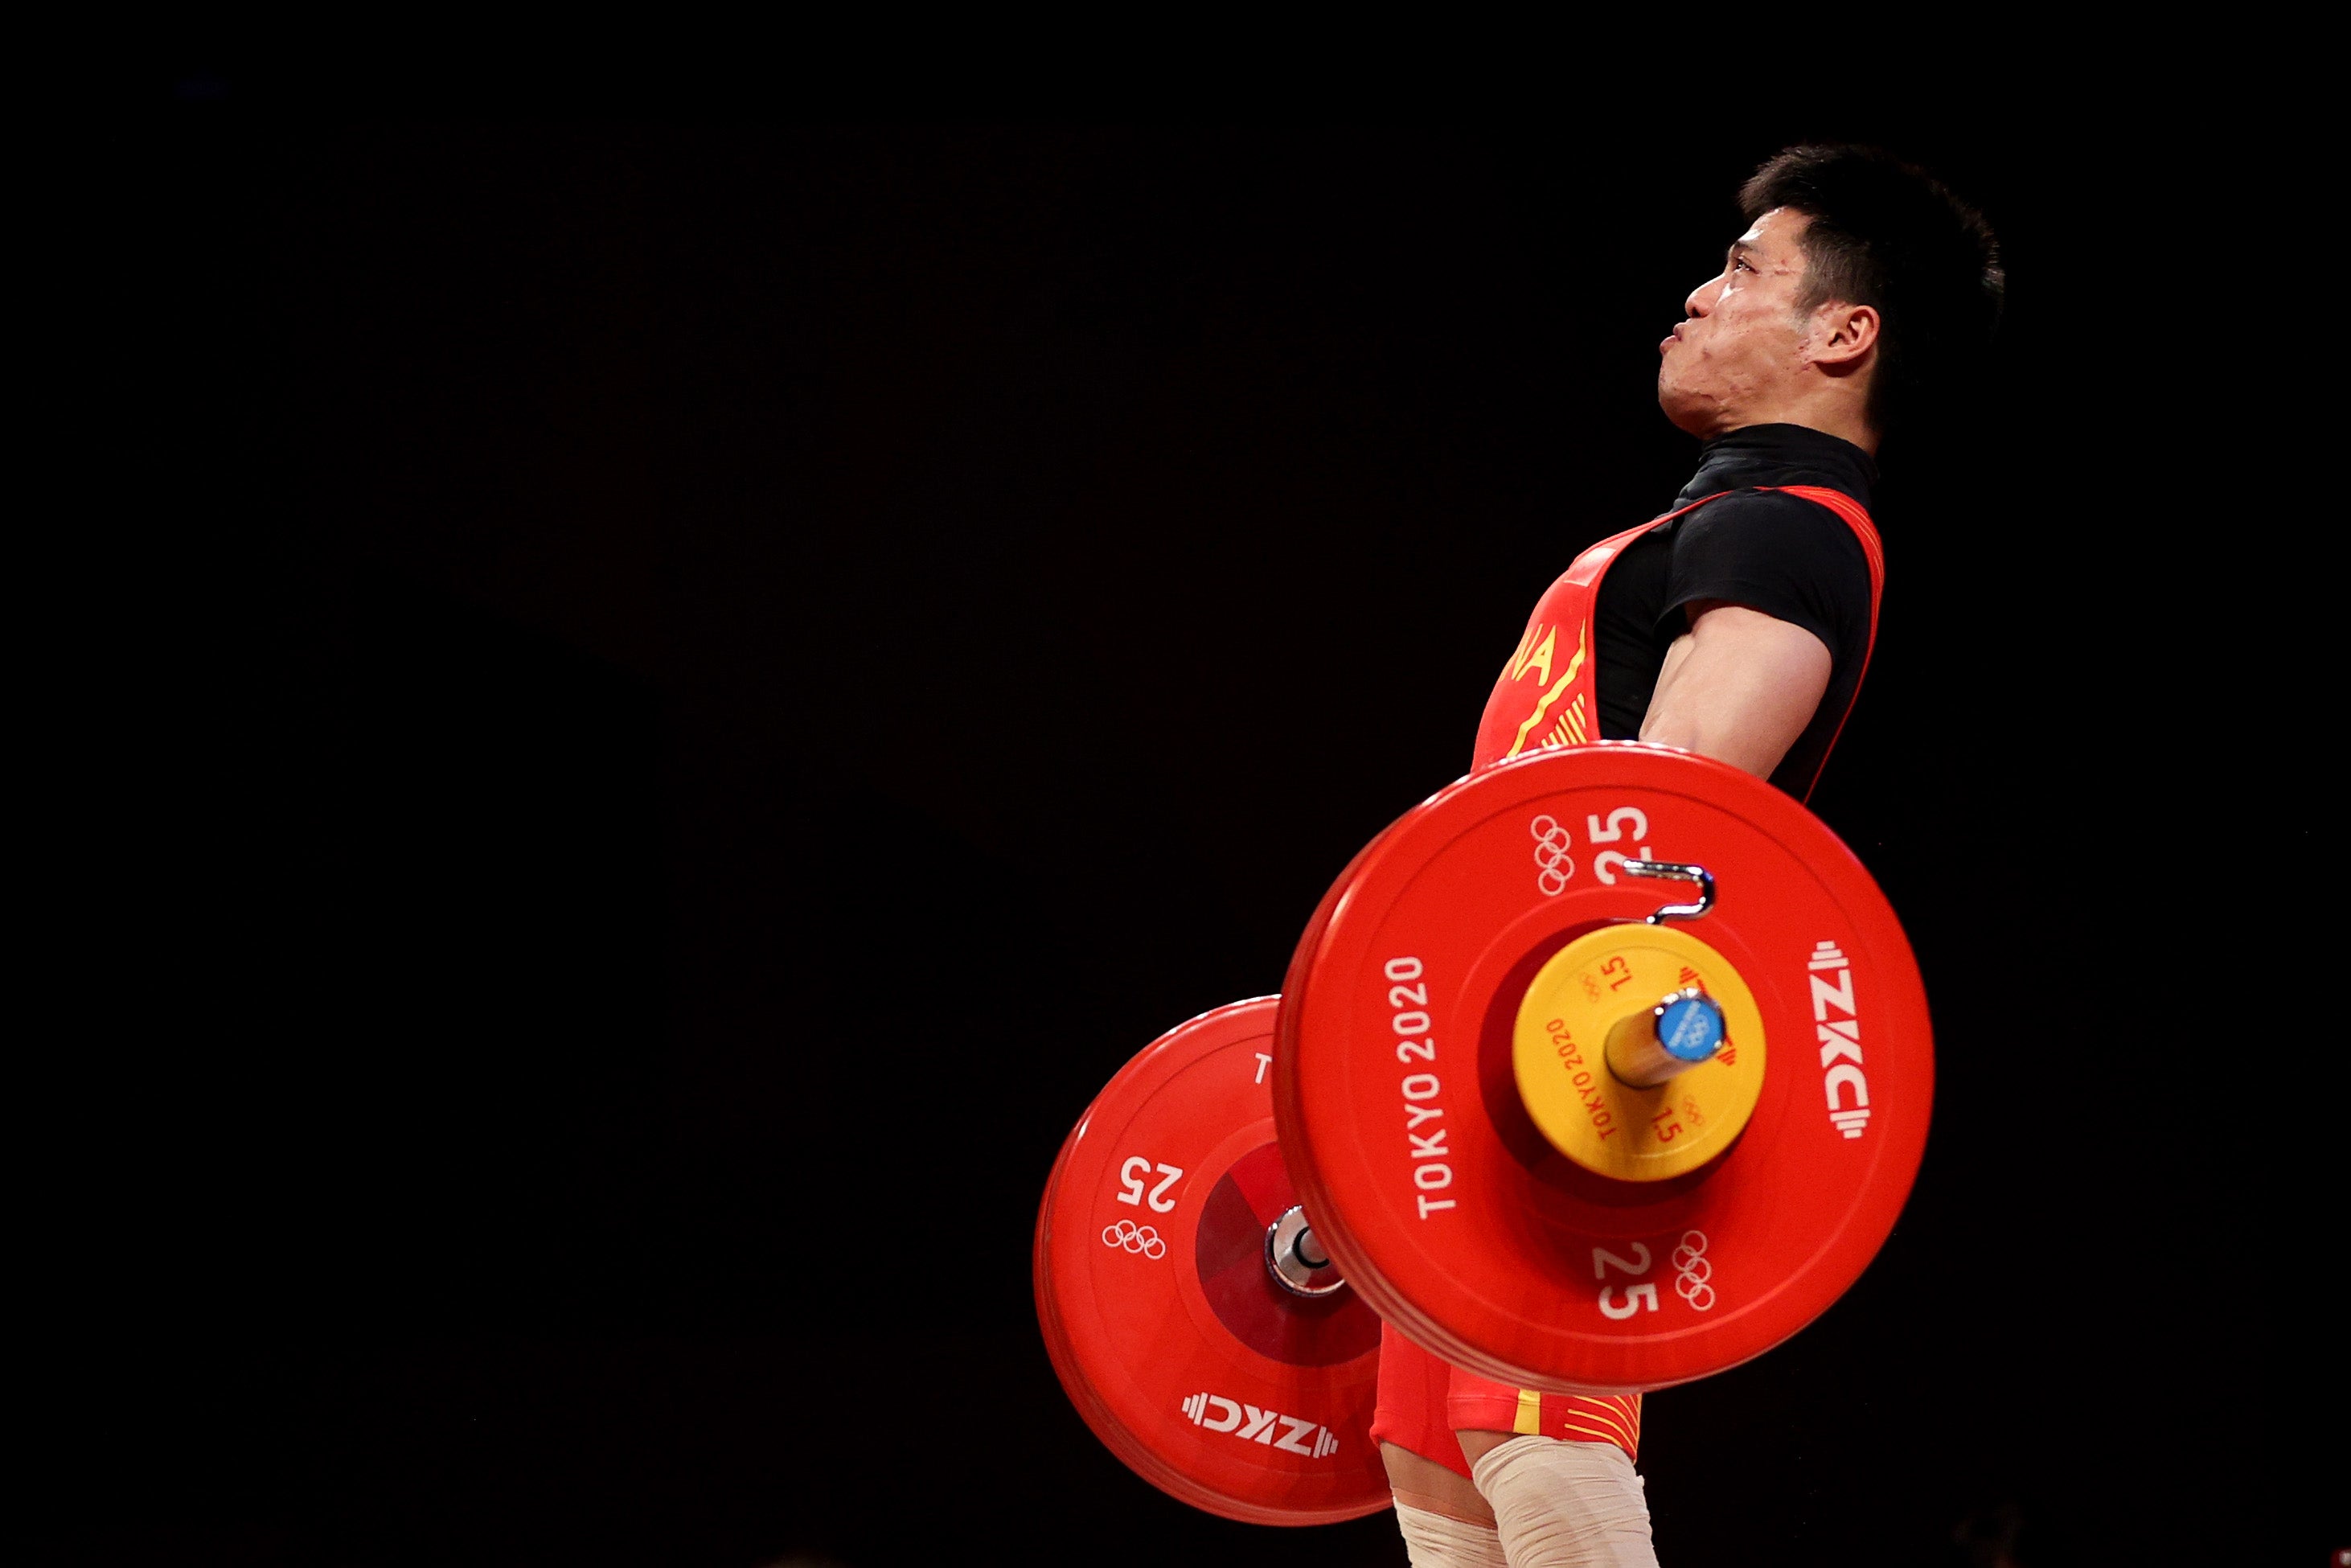 China’s Olympic athletes have delivered powerful performances in weightlifting and other competitions